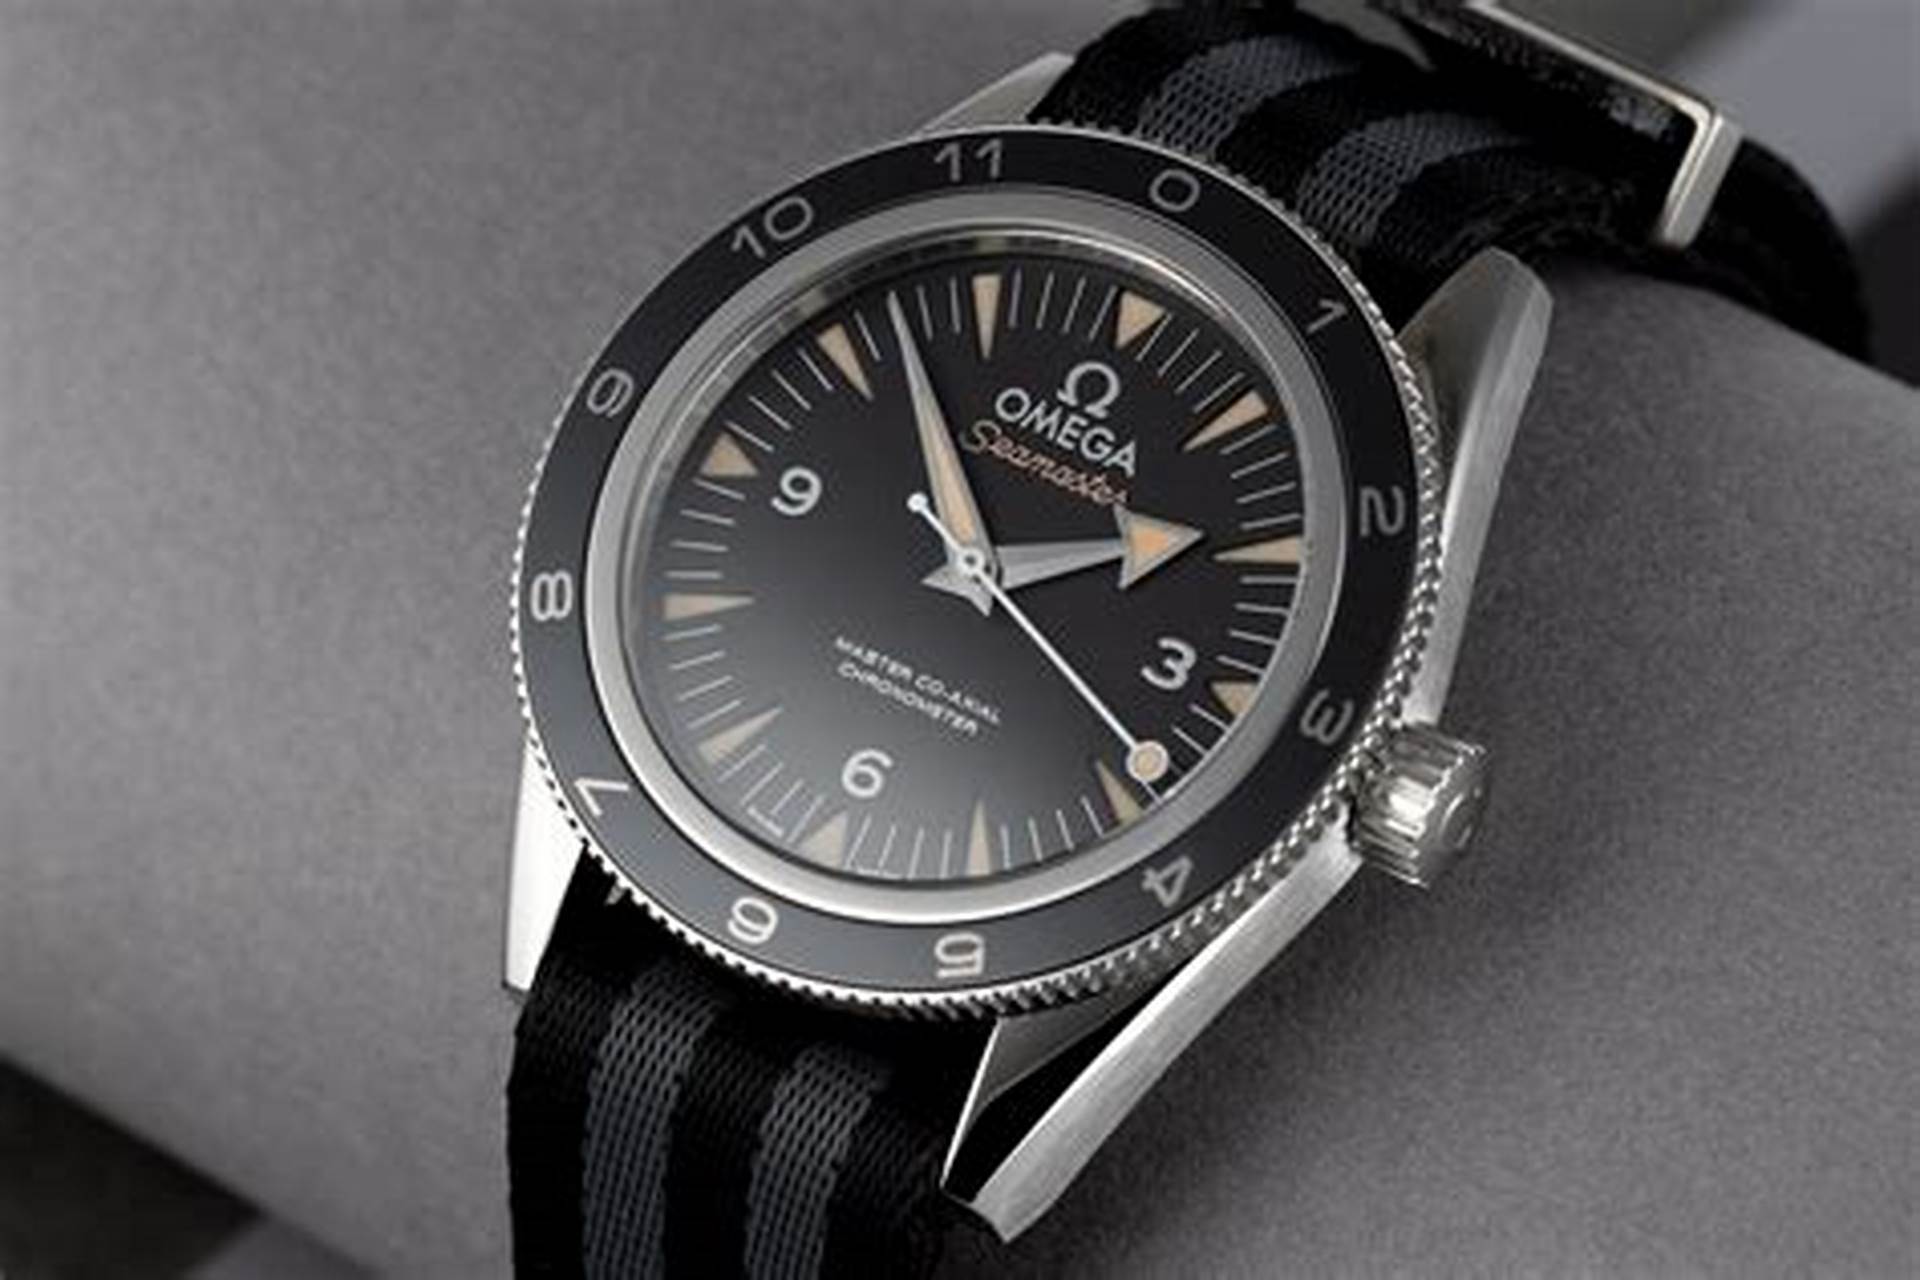 With the NATO strap, this fake Omega is more dynamic.